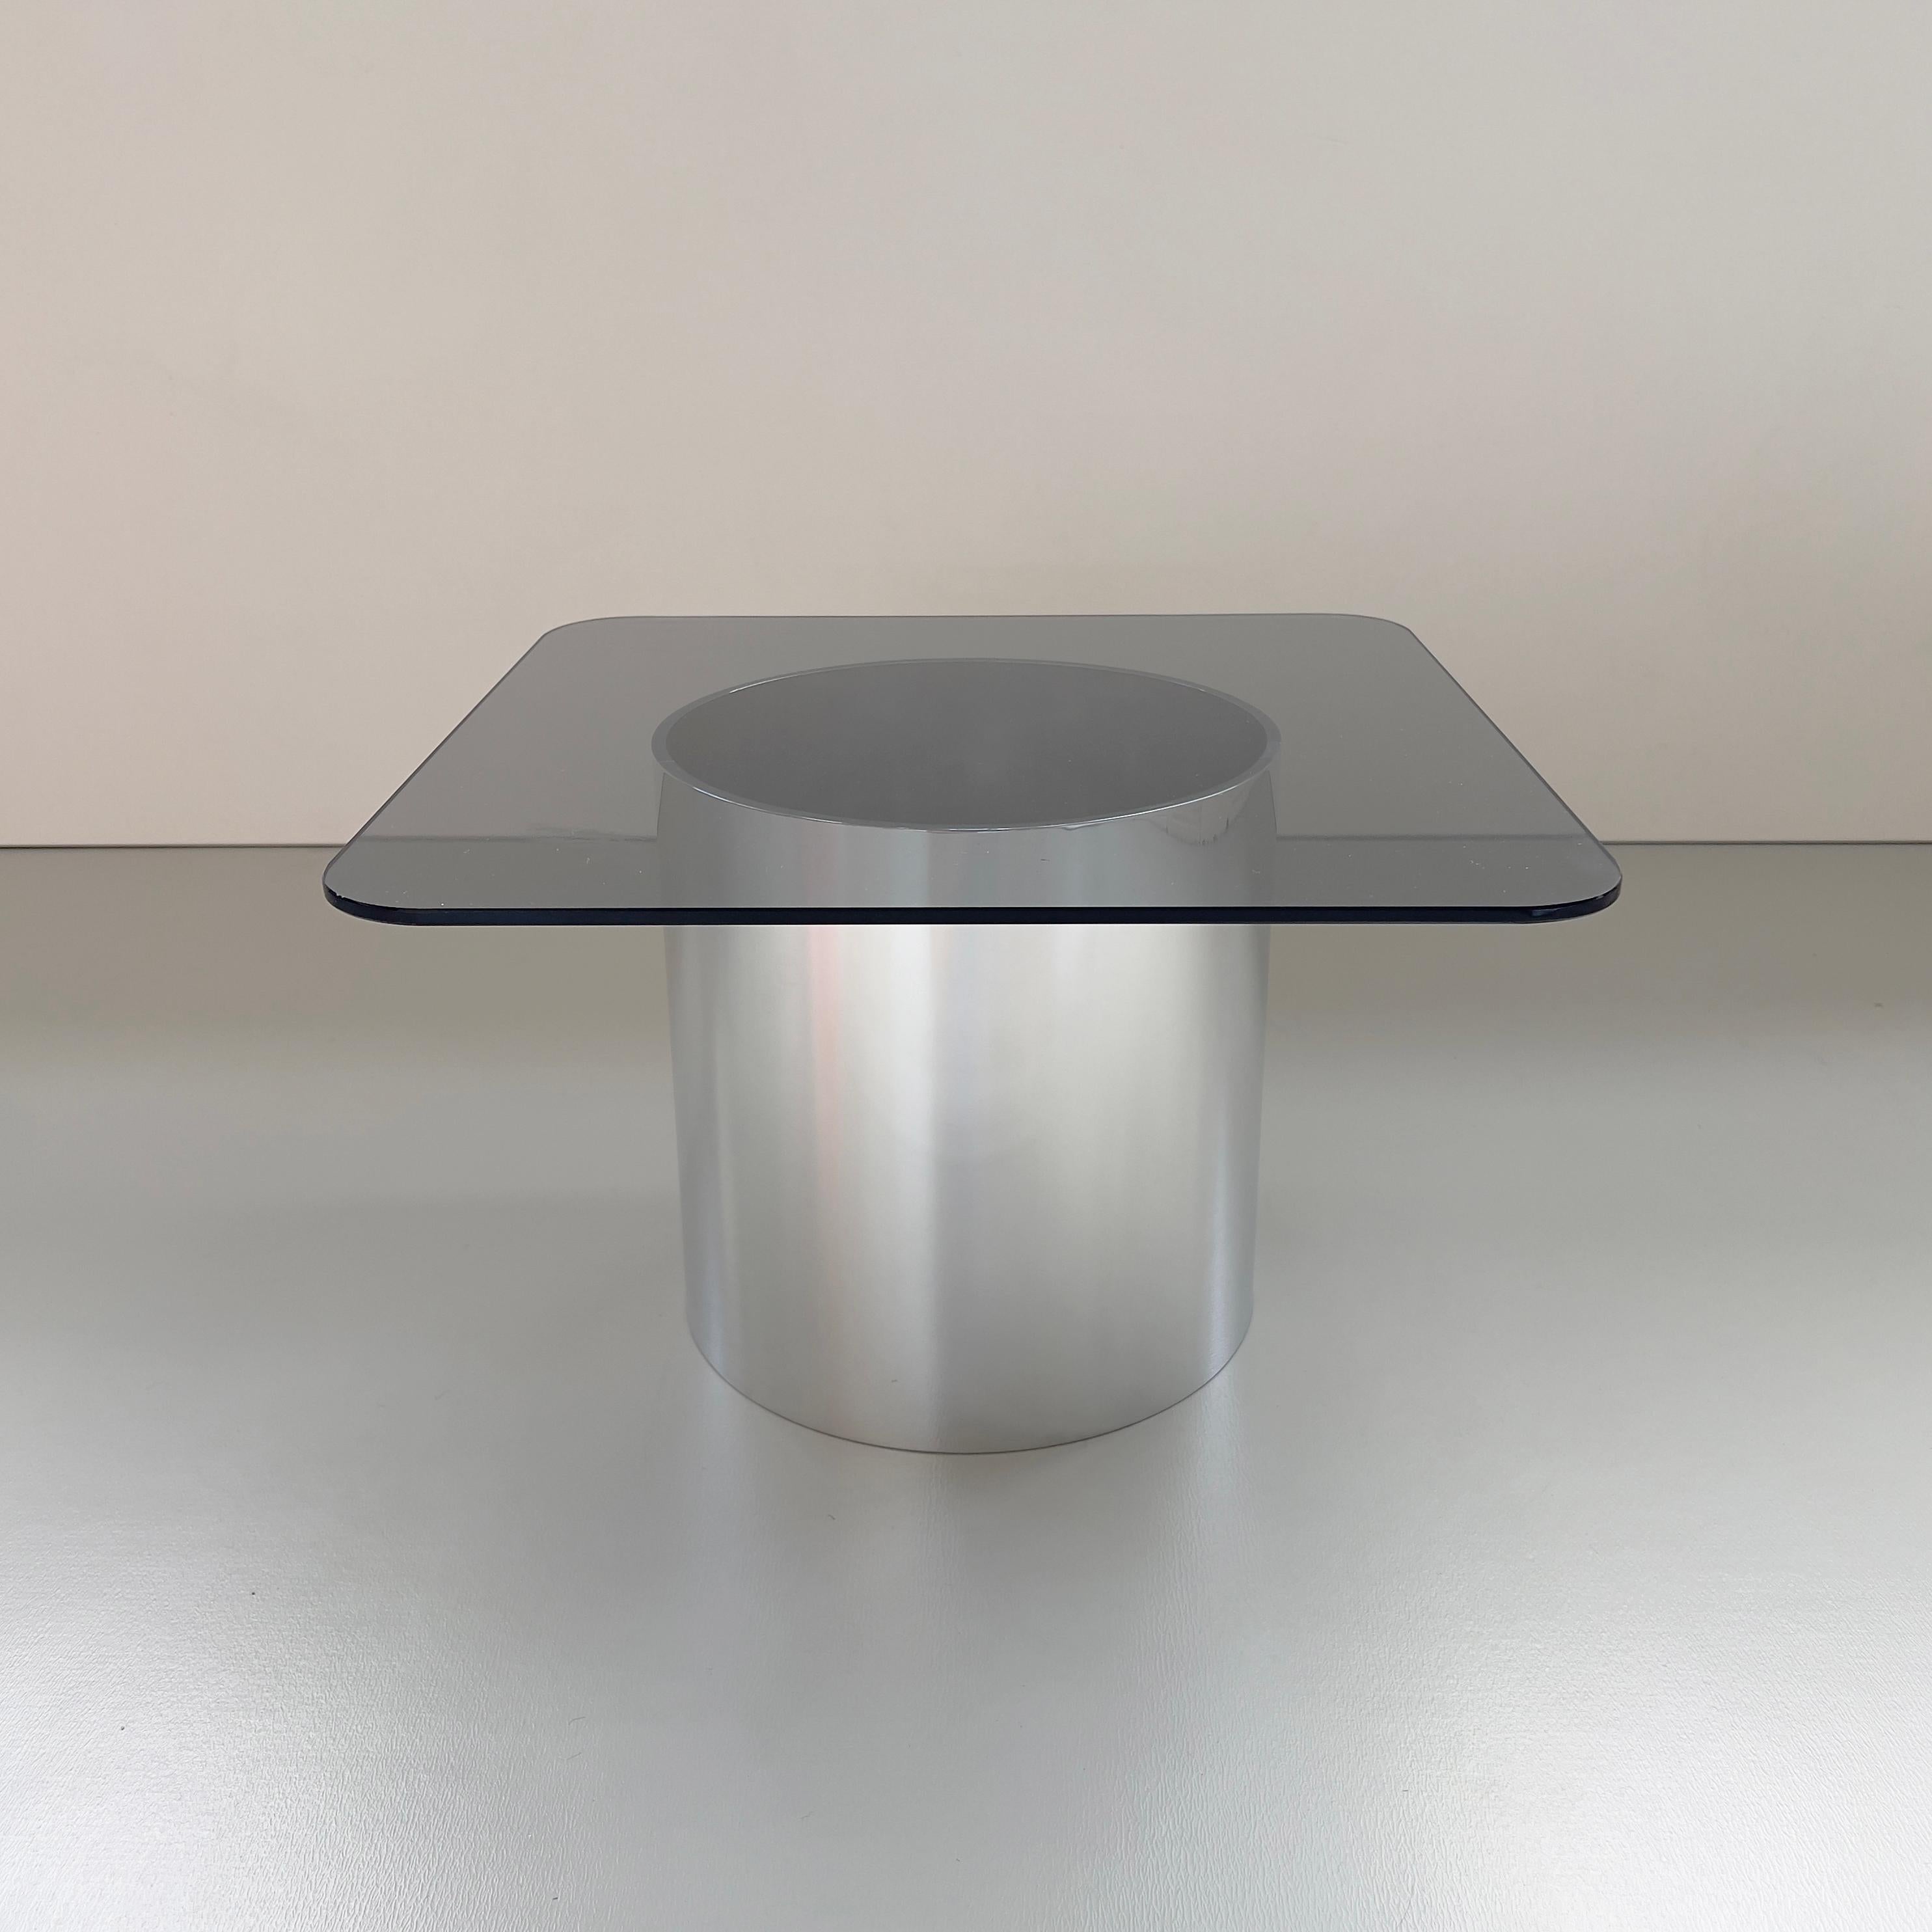 'MMPM' Tubular aluminium and grey tinted glass low side table.

This design further explores the designers obsession with tubular metal and graphical form. Still in his trademark minimal style, these tables are crafted in hand-polished aluminium